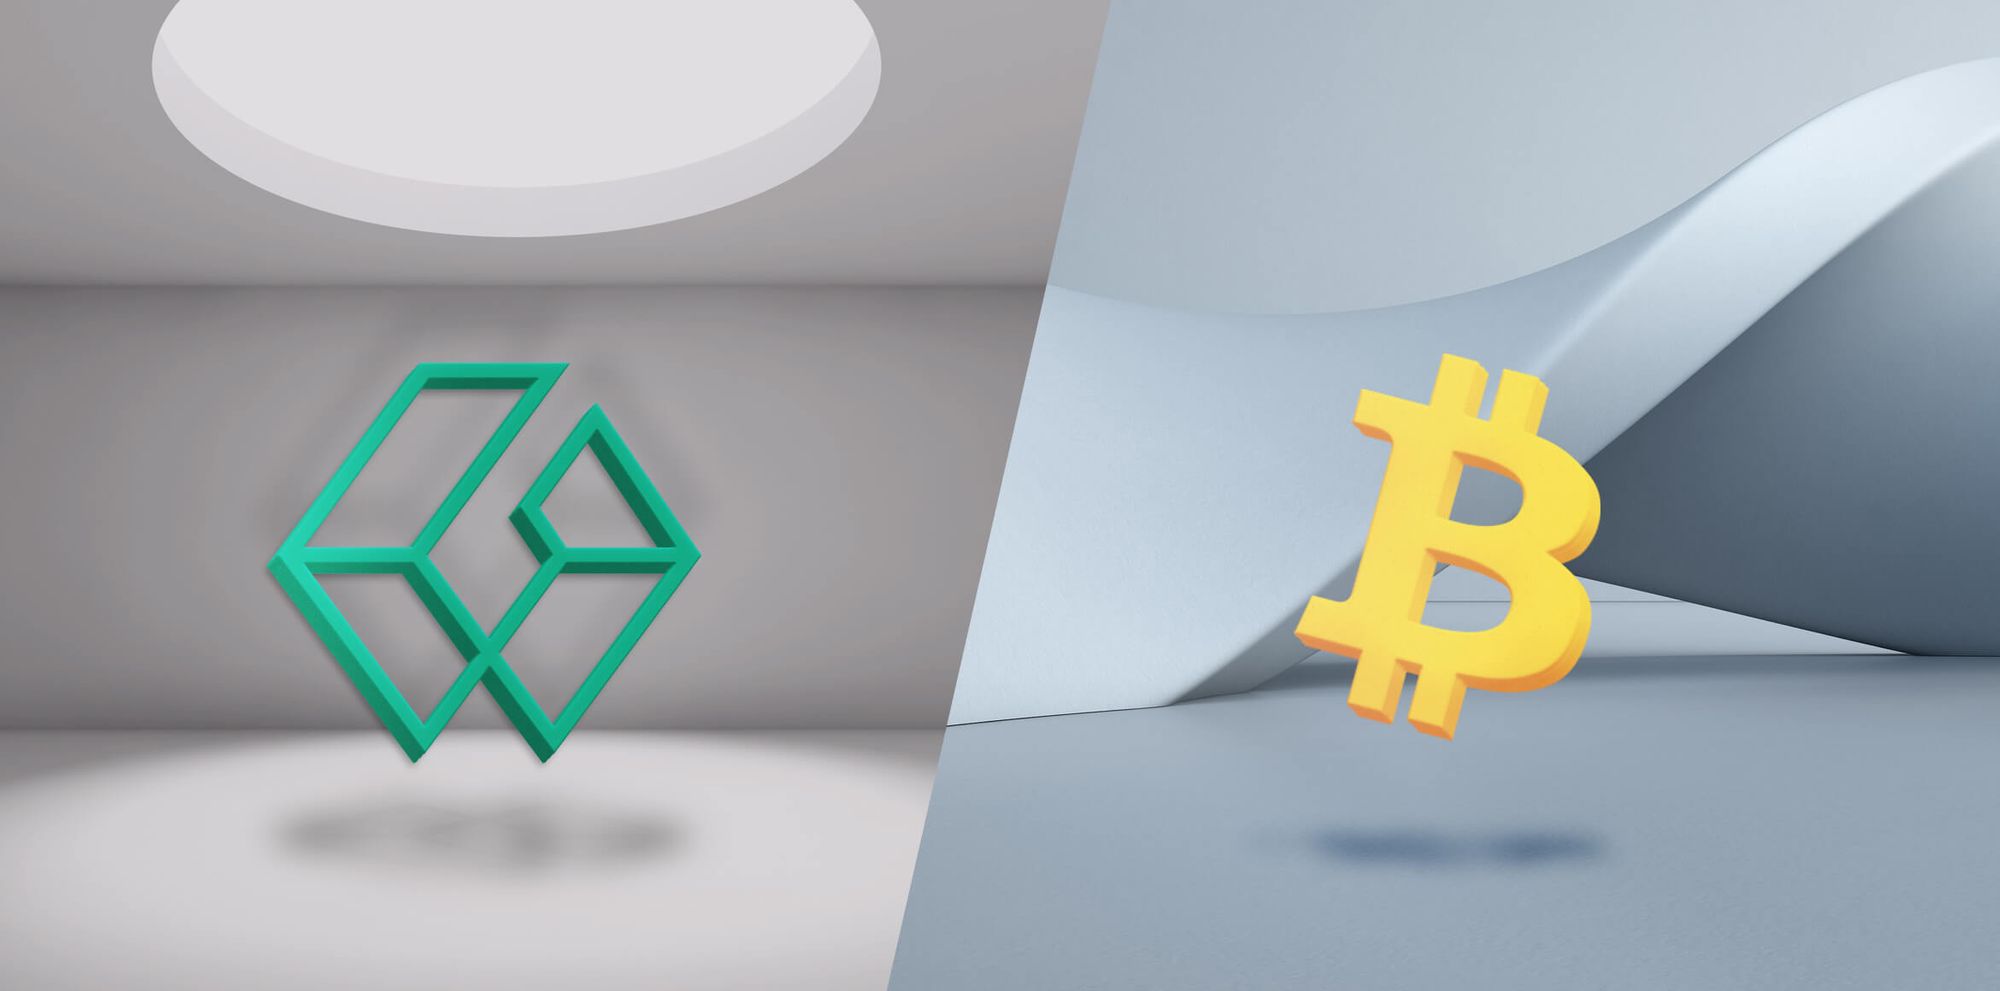 GBTC vs. Bitcoin: Which is Better?